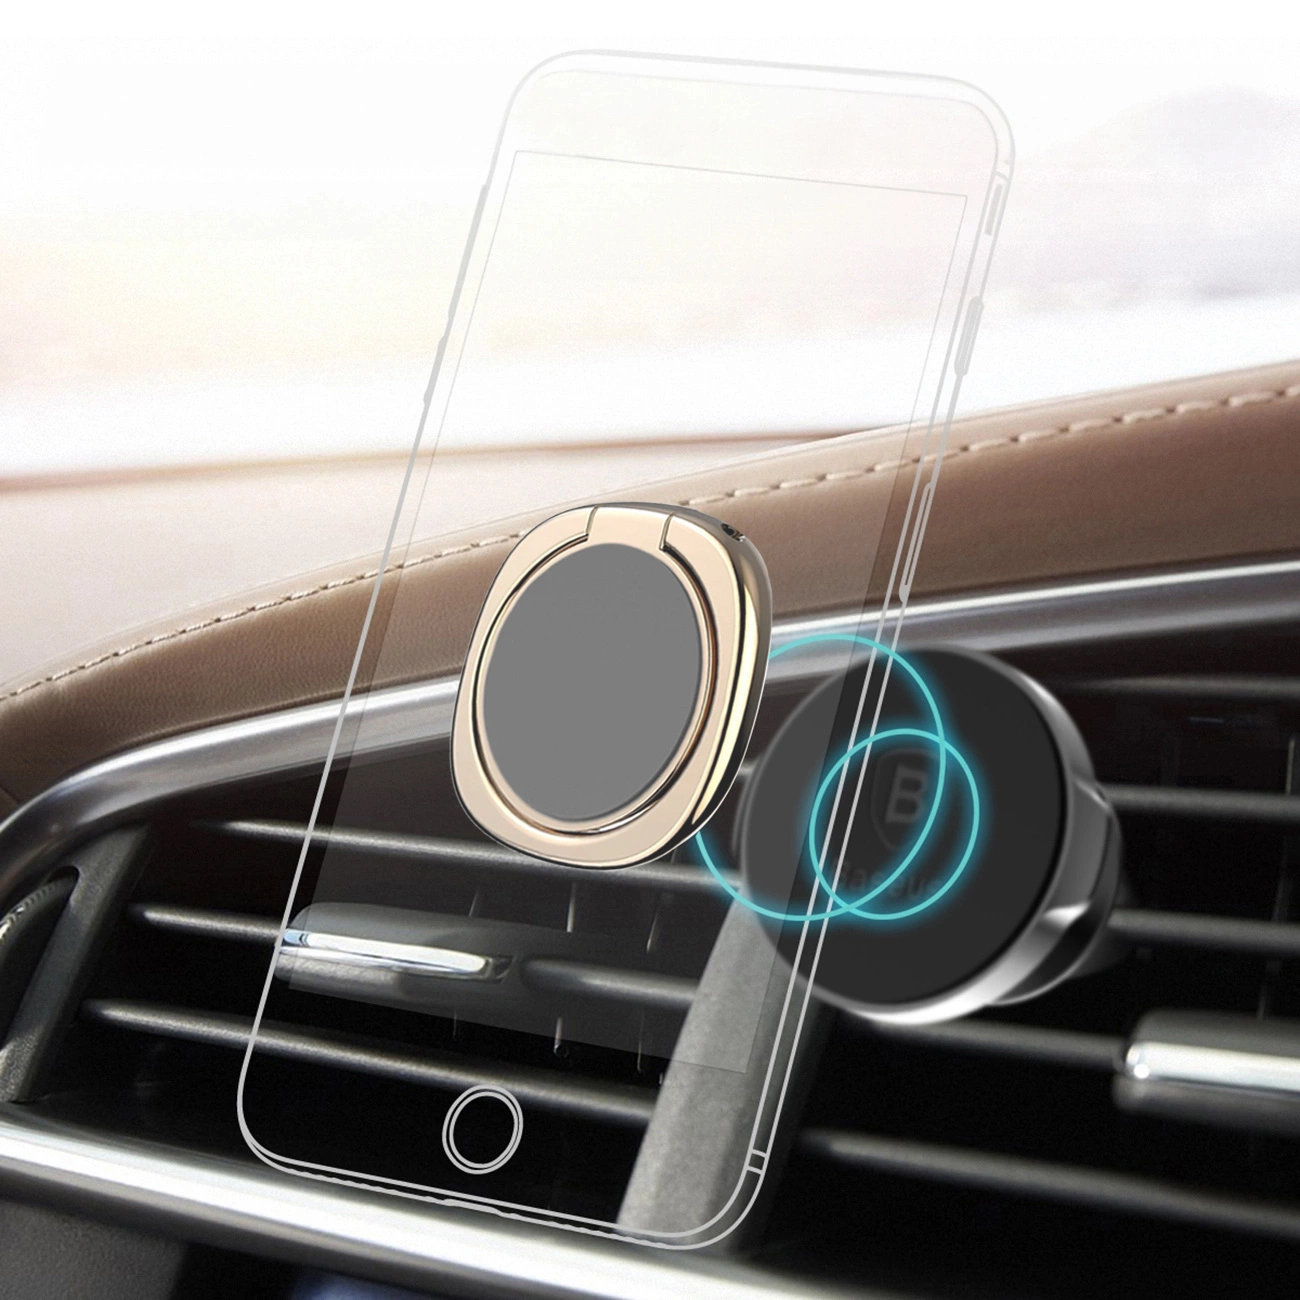 Visualization of attaching the gold Baseus Privity Ring holder to the phone holder in the car's ventilation grill